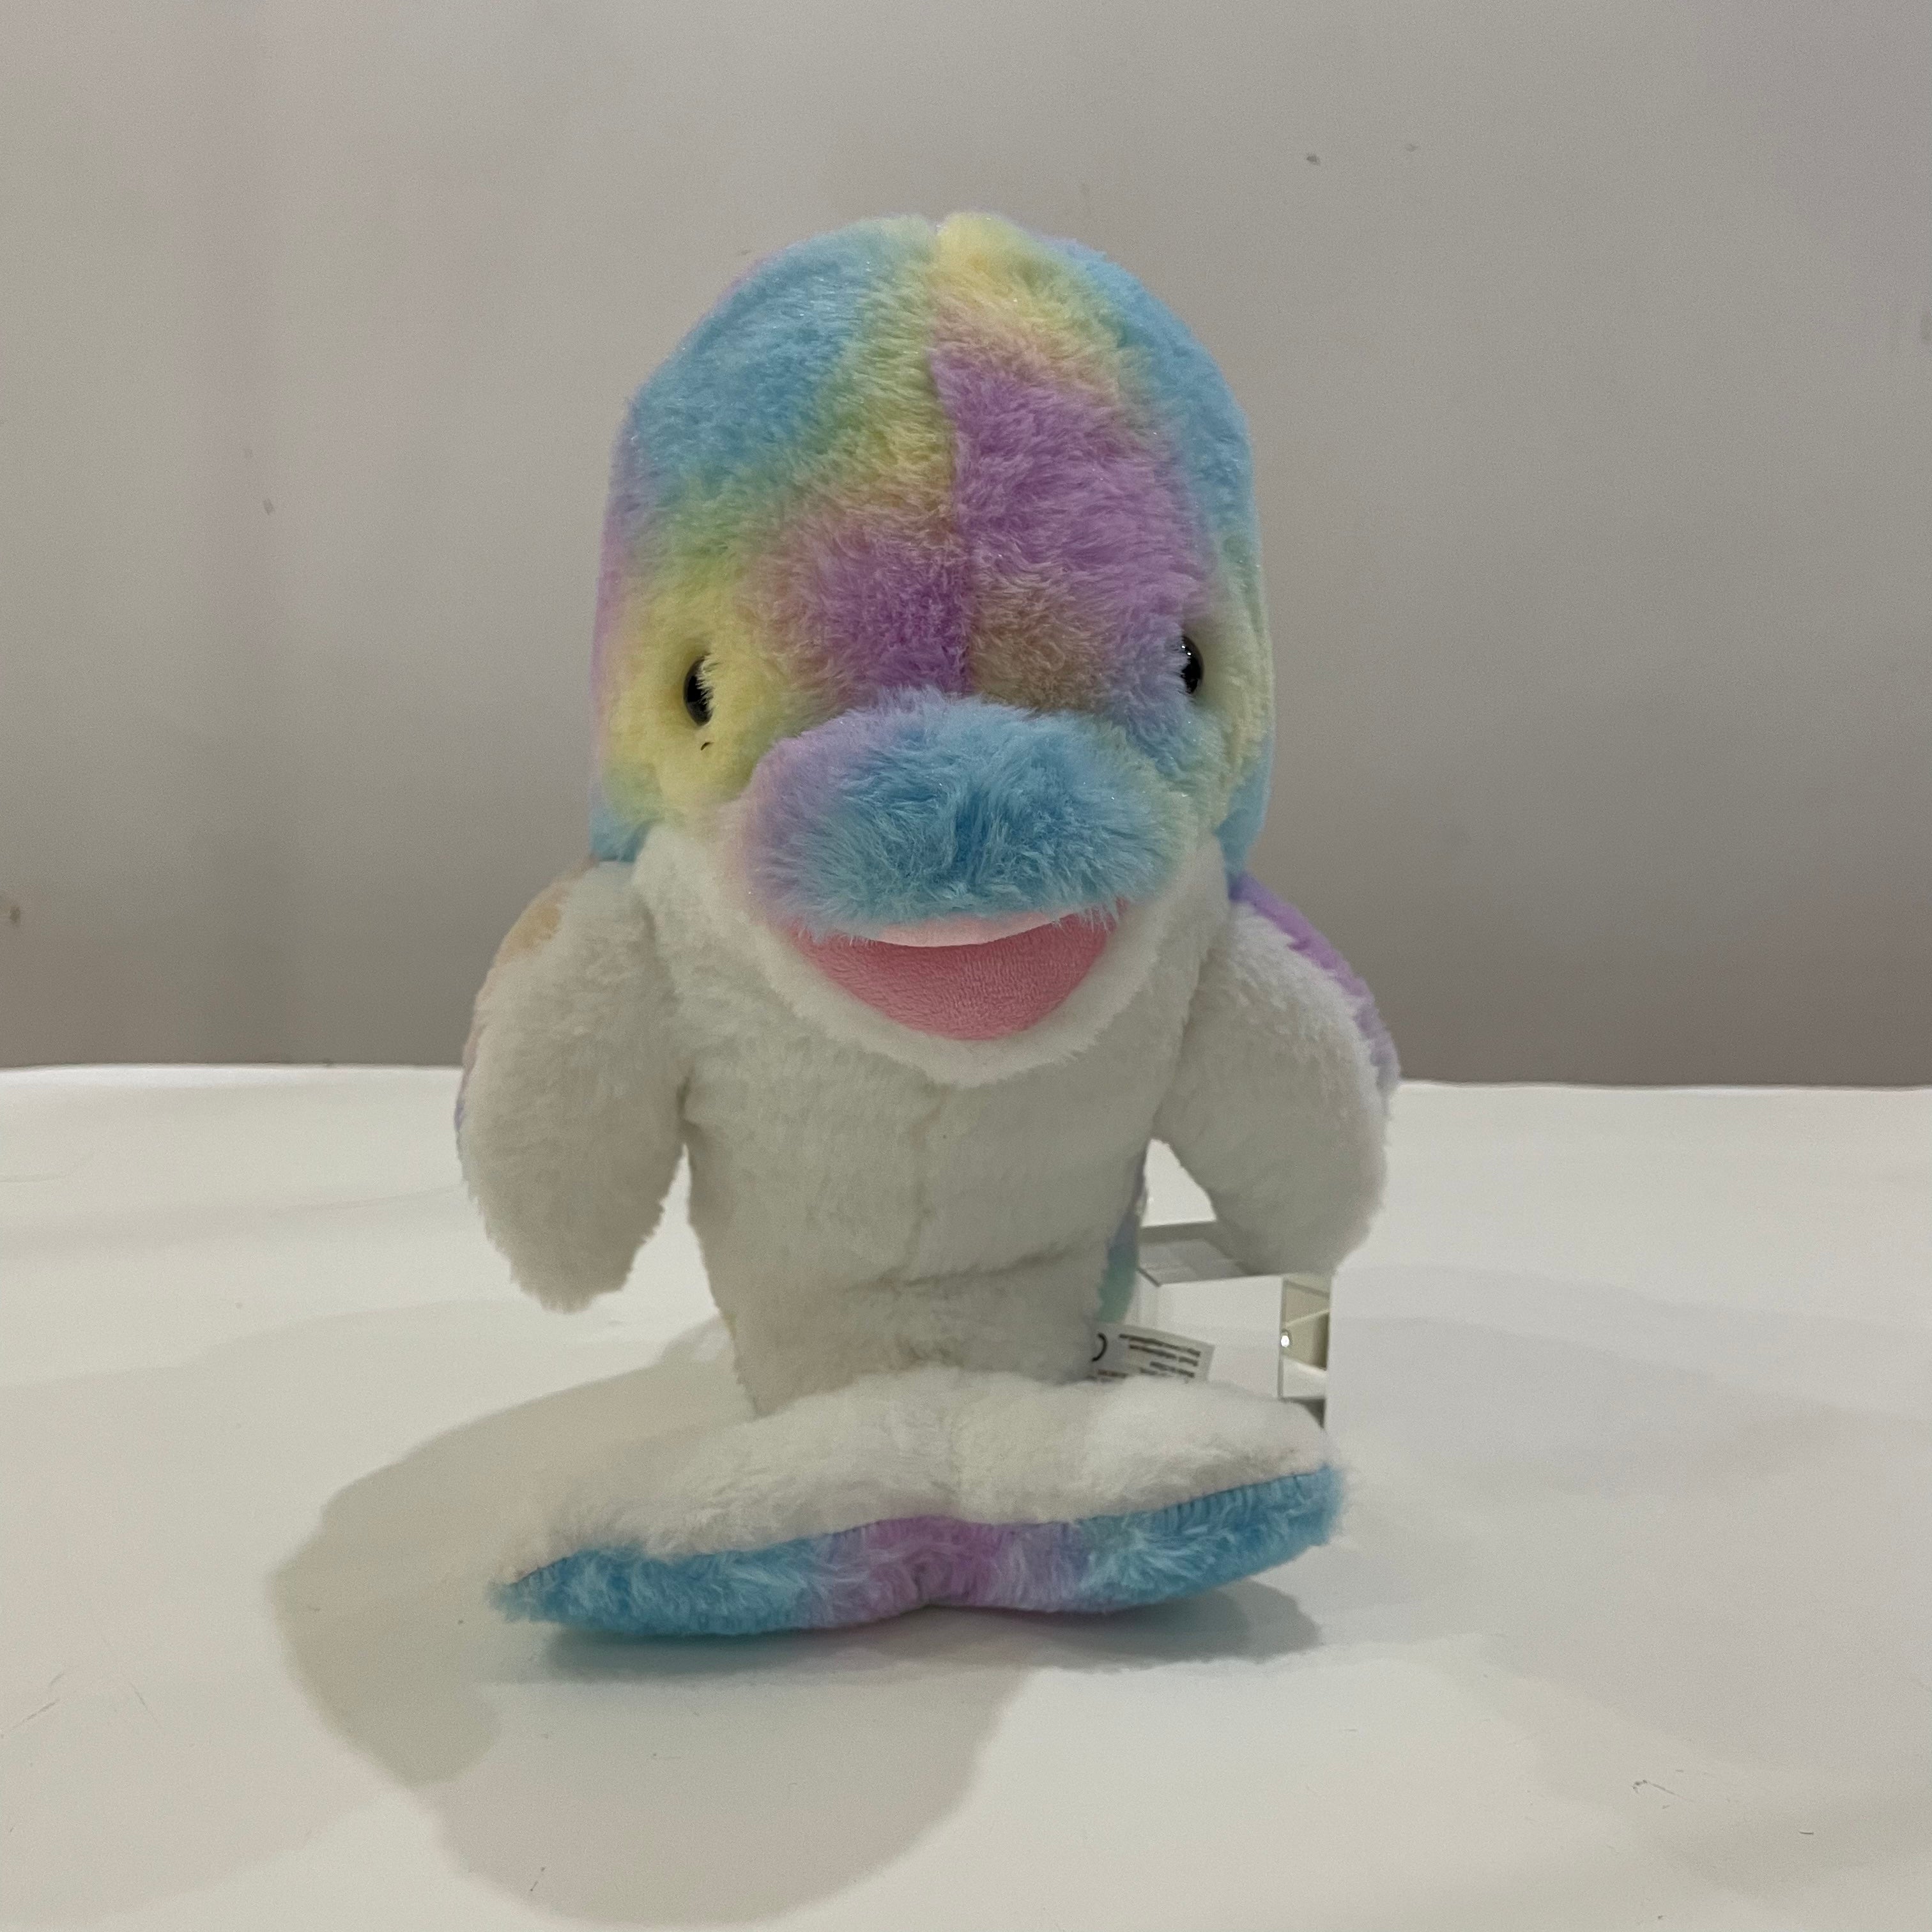 Light up Dolphin Rainbow Stuffed Animals LED Ocean Life Soft Plush Toy with Night Light Bedtime Pal Valentine's Day Birthday for Toddler Kids